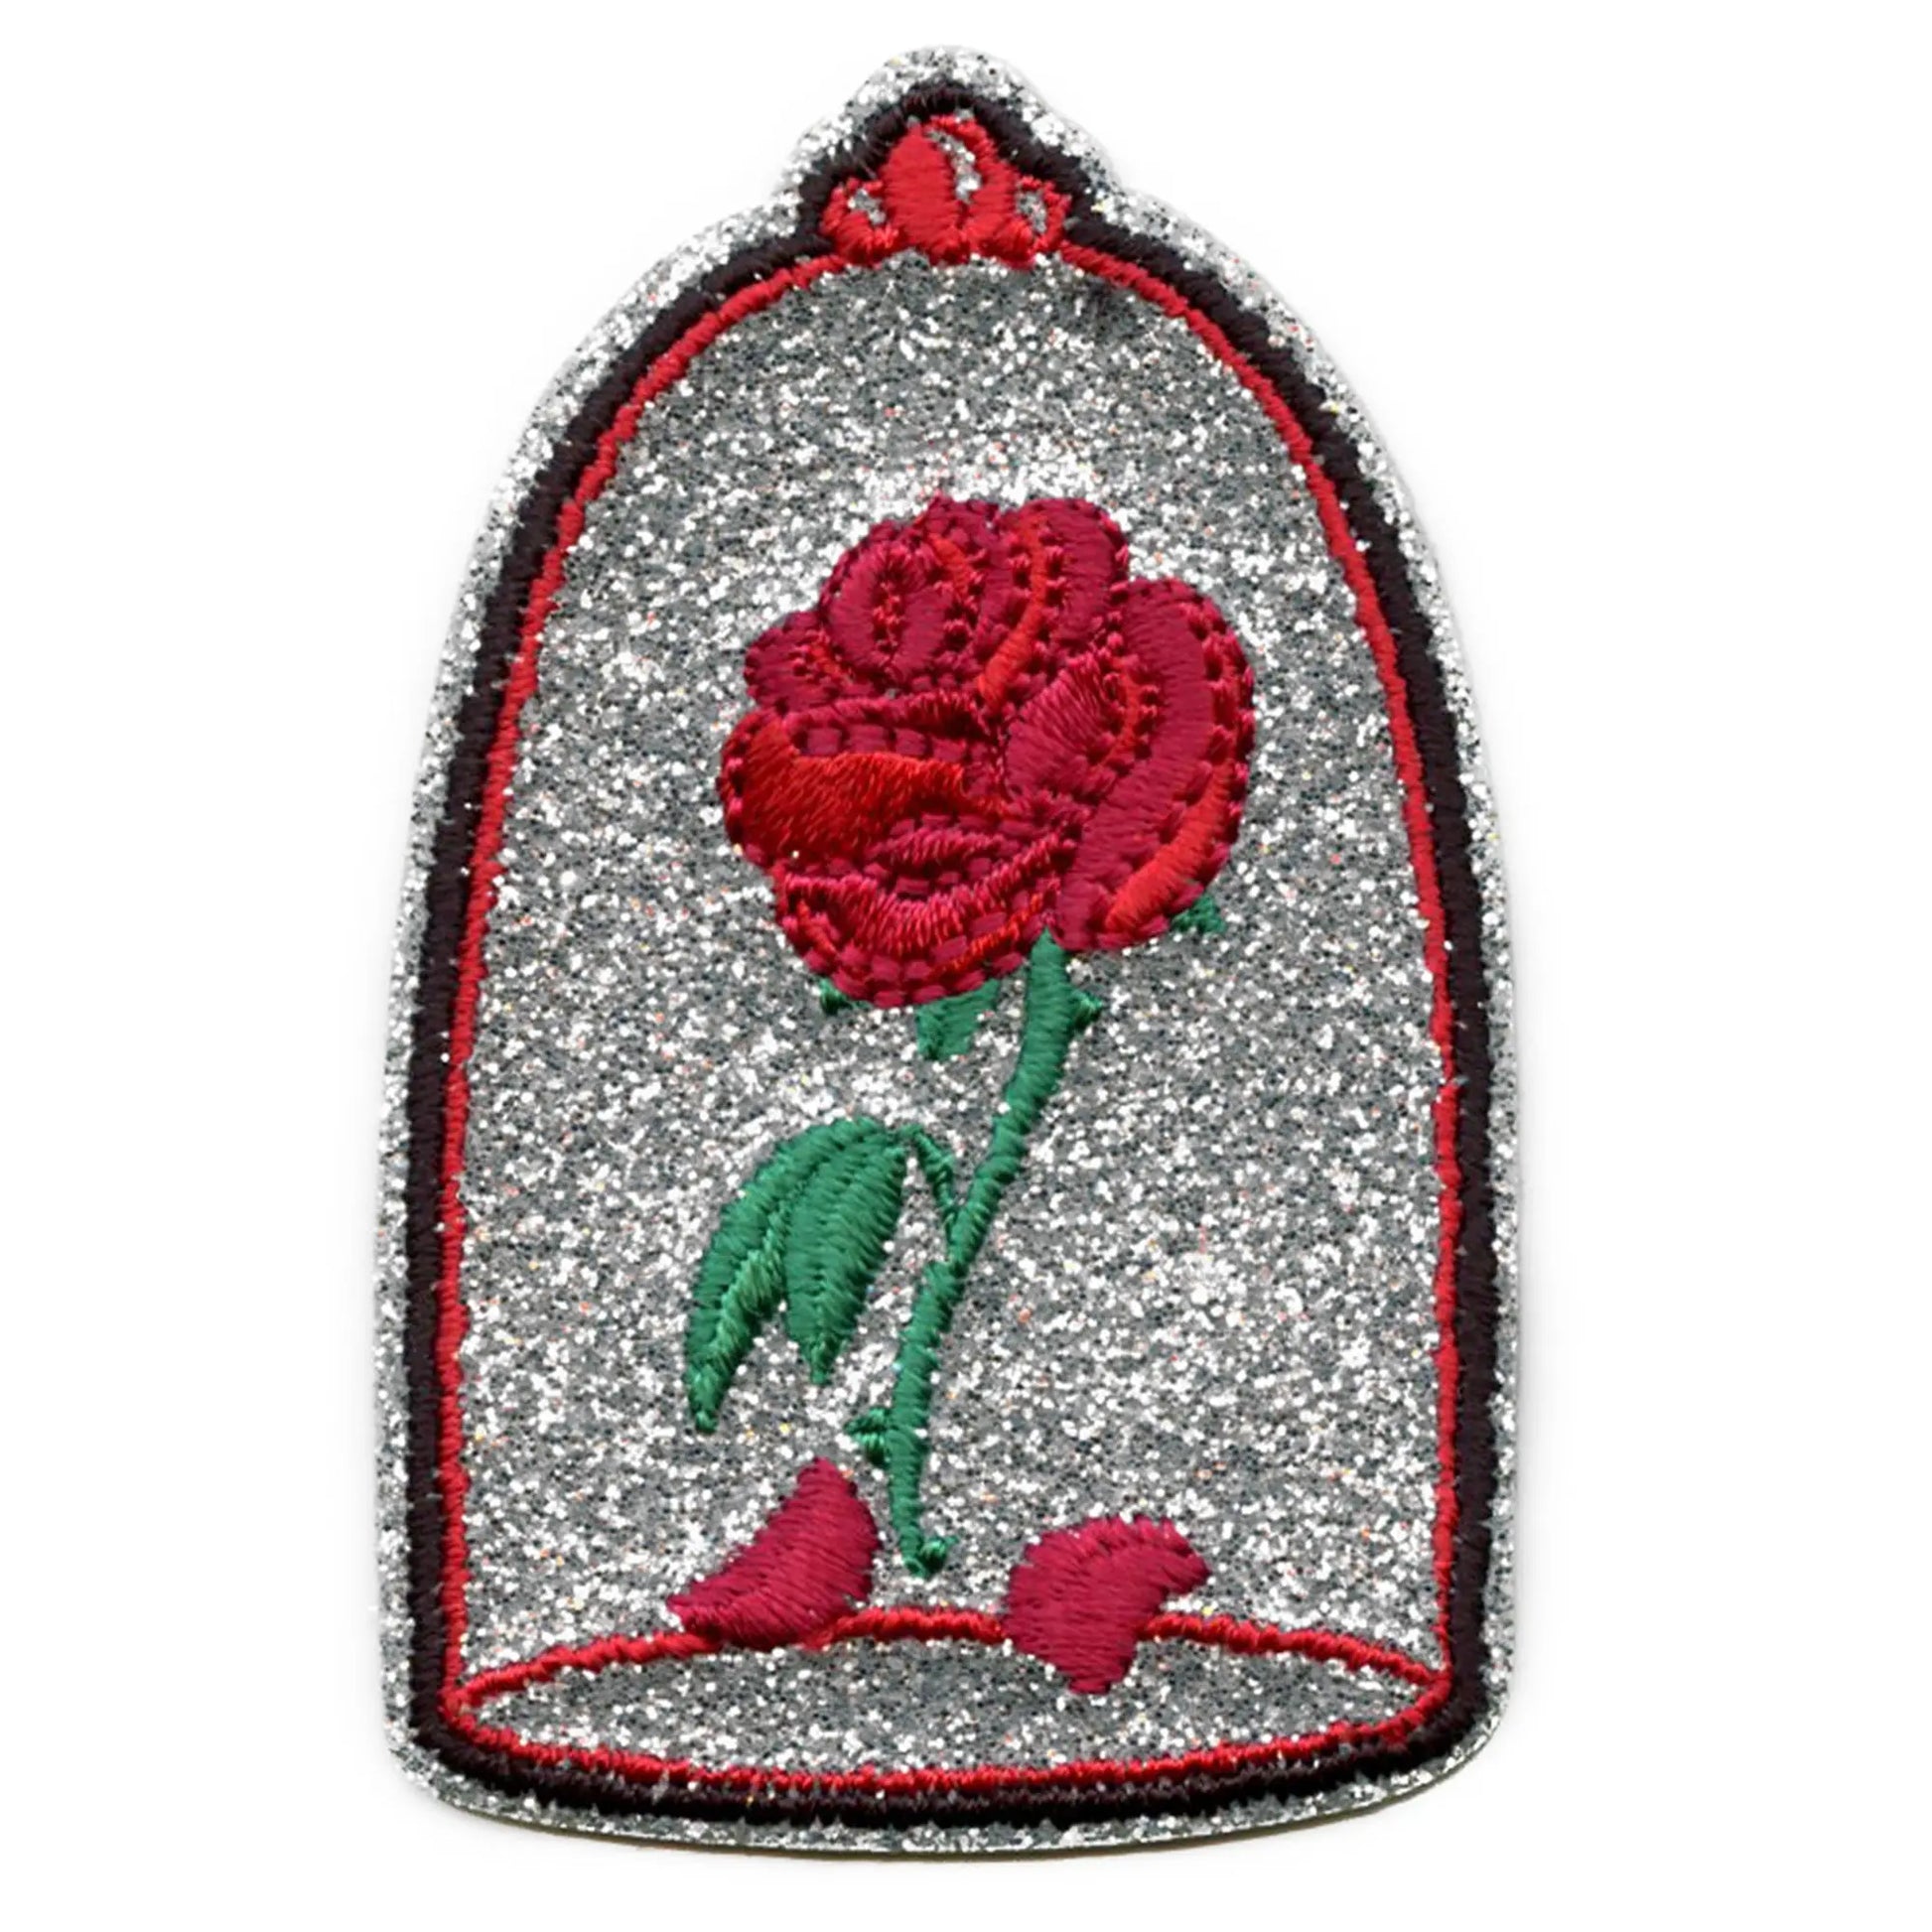 Disney Enchanted Rose Patch Beauty And The Beast Embroidery Iron On